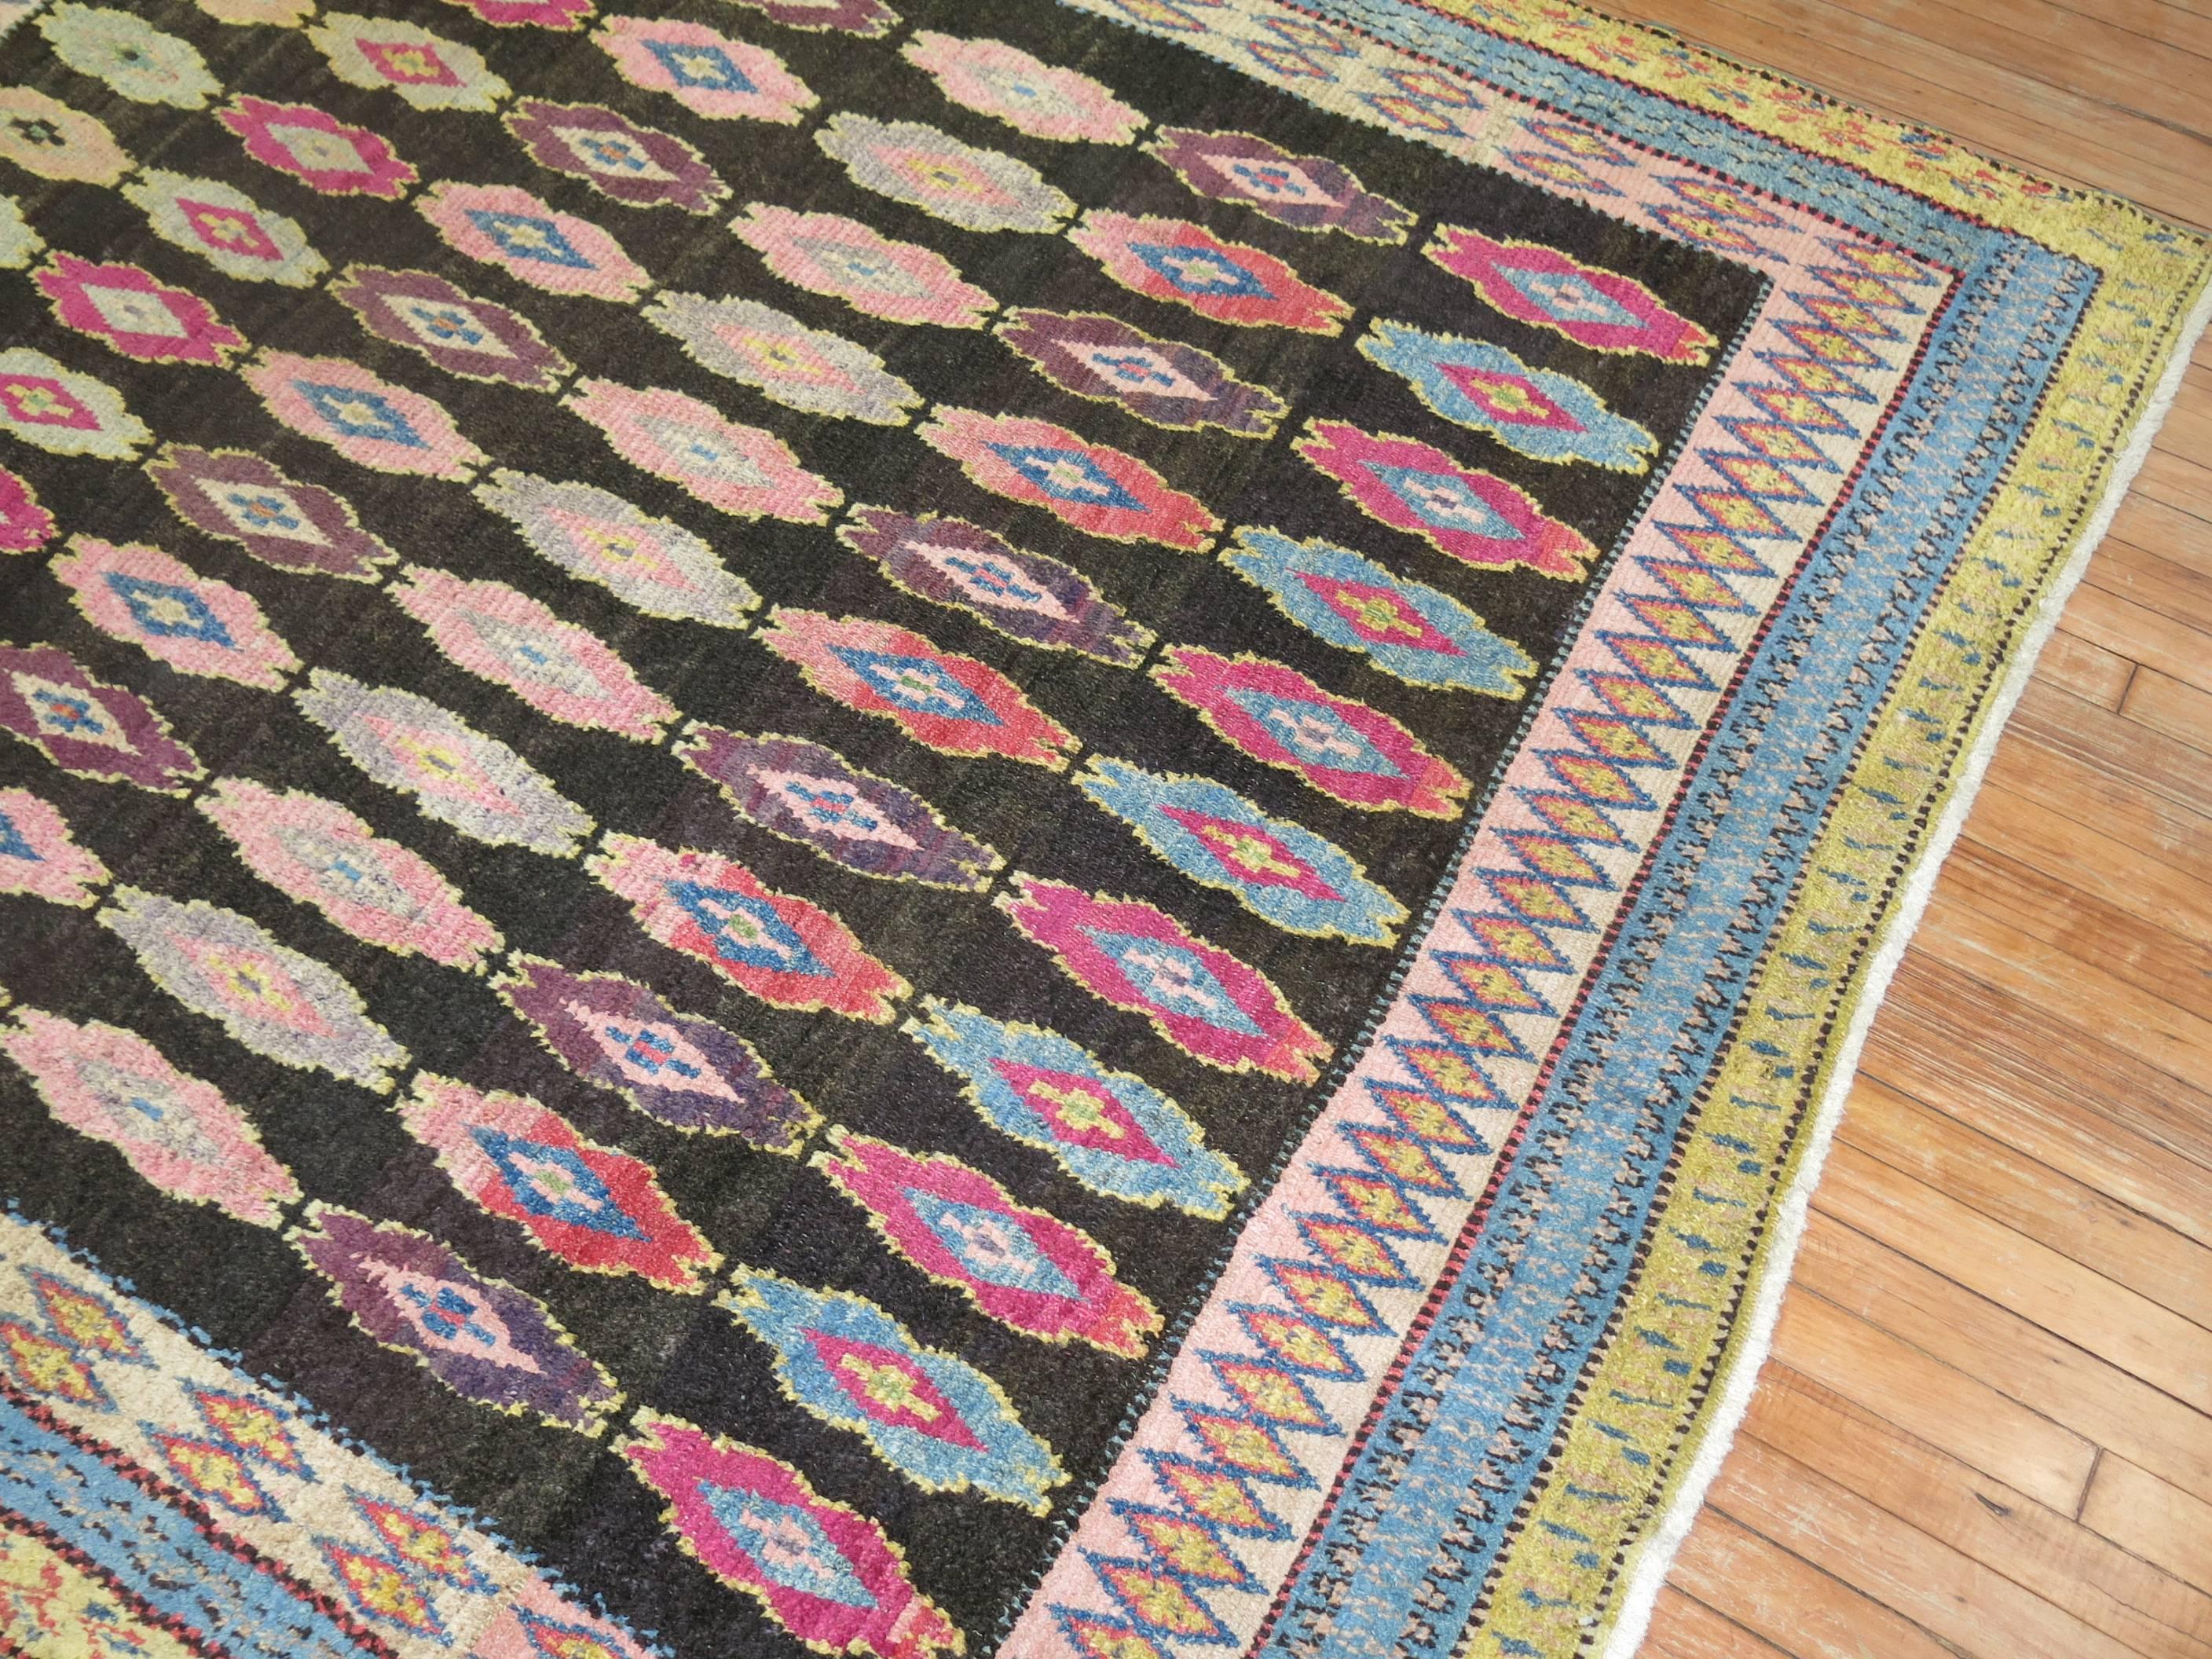 Hand-Woven Mysterious Vintage Rug